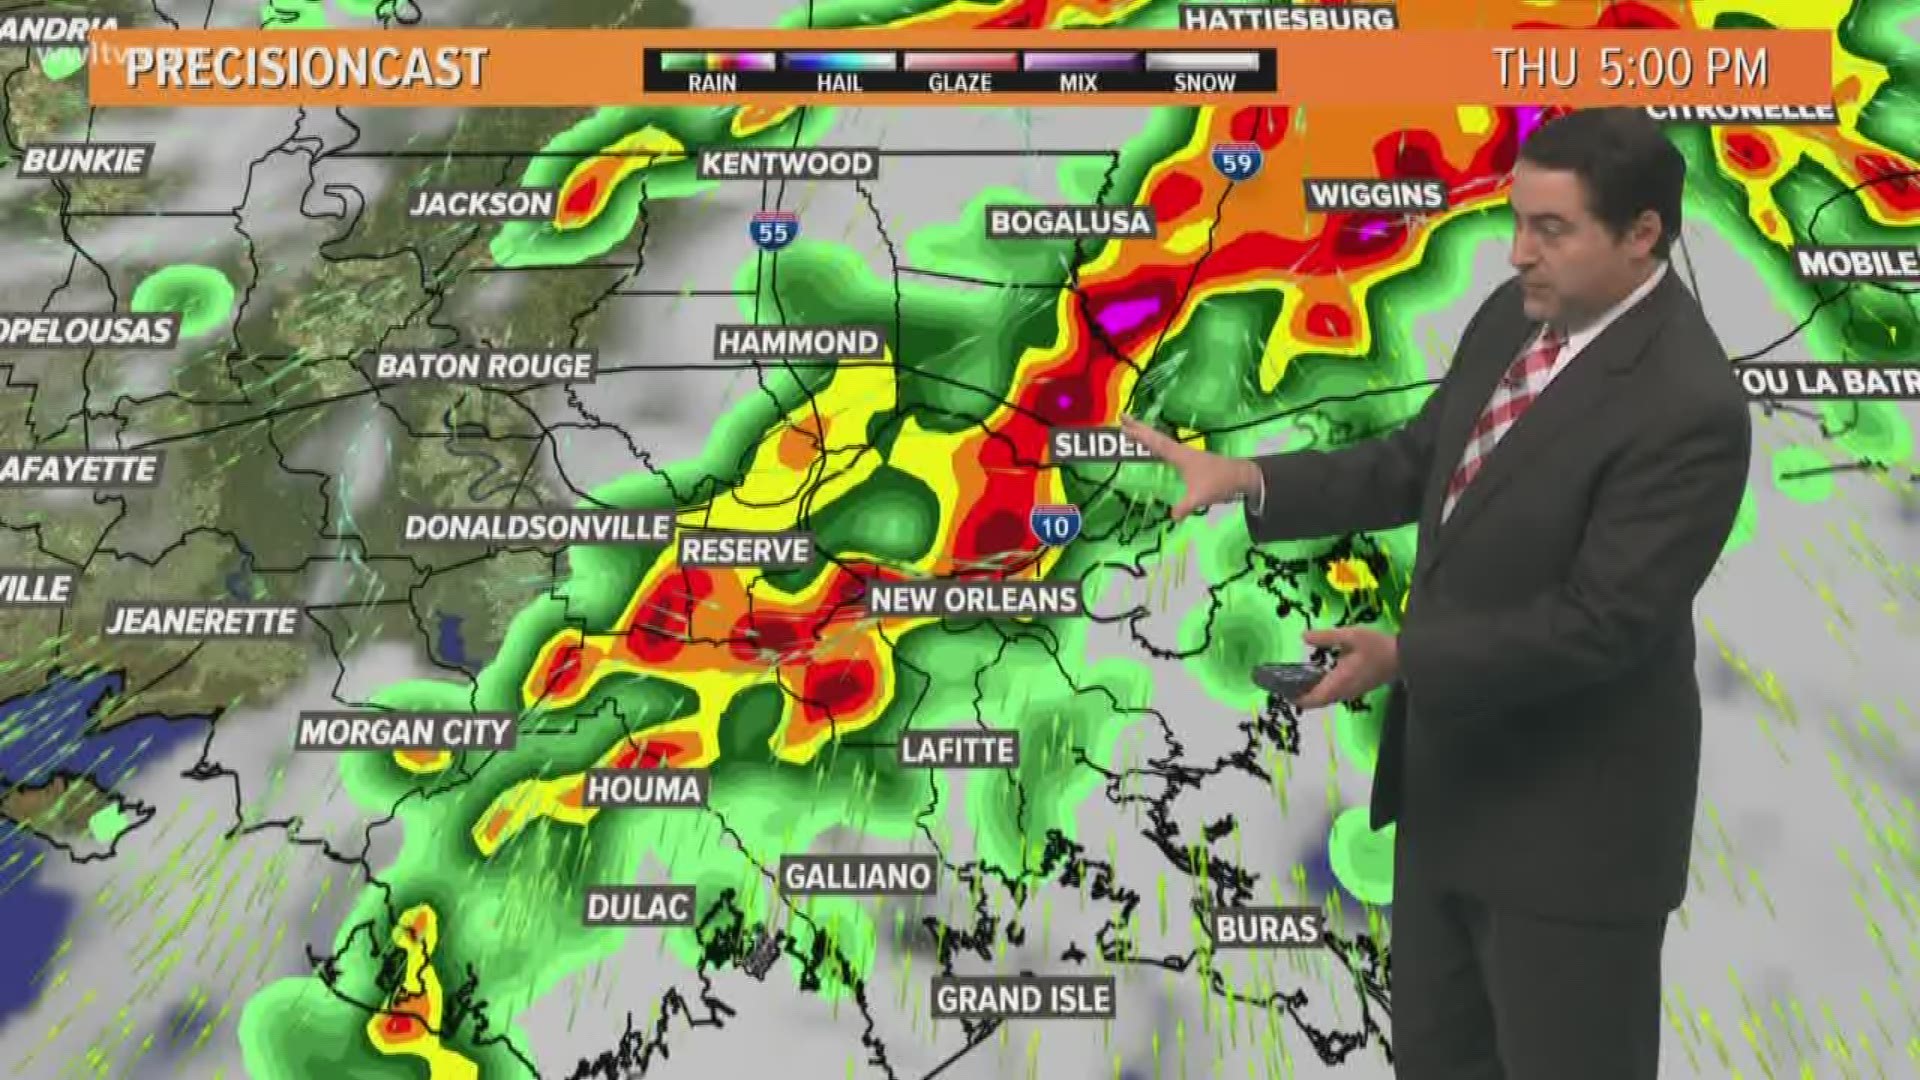 Meteorologist Dave Nussbaum says it will be mostly cloudy, warm and humid today across the New Orleans area. Then strong to possibly severe storms with heavy rain arrive on Thursday.